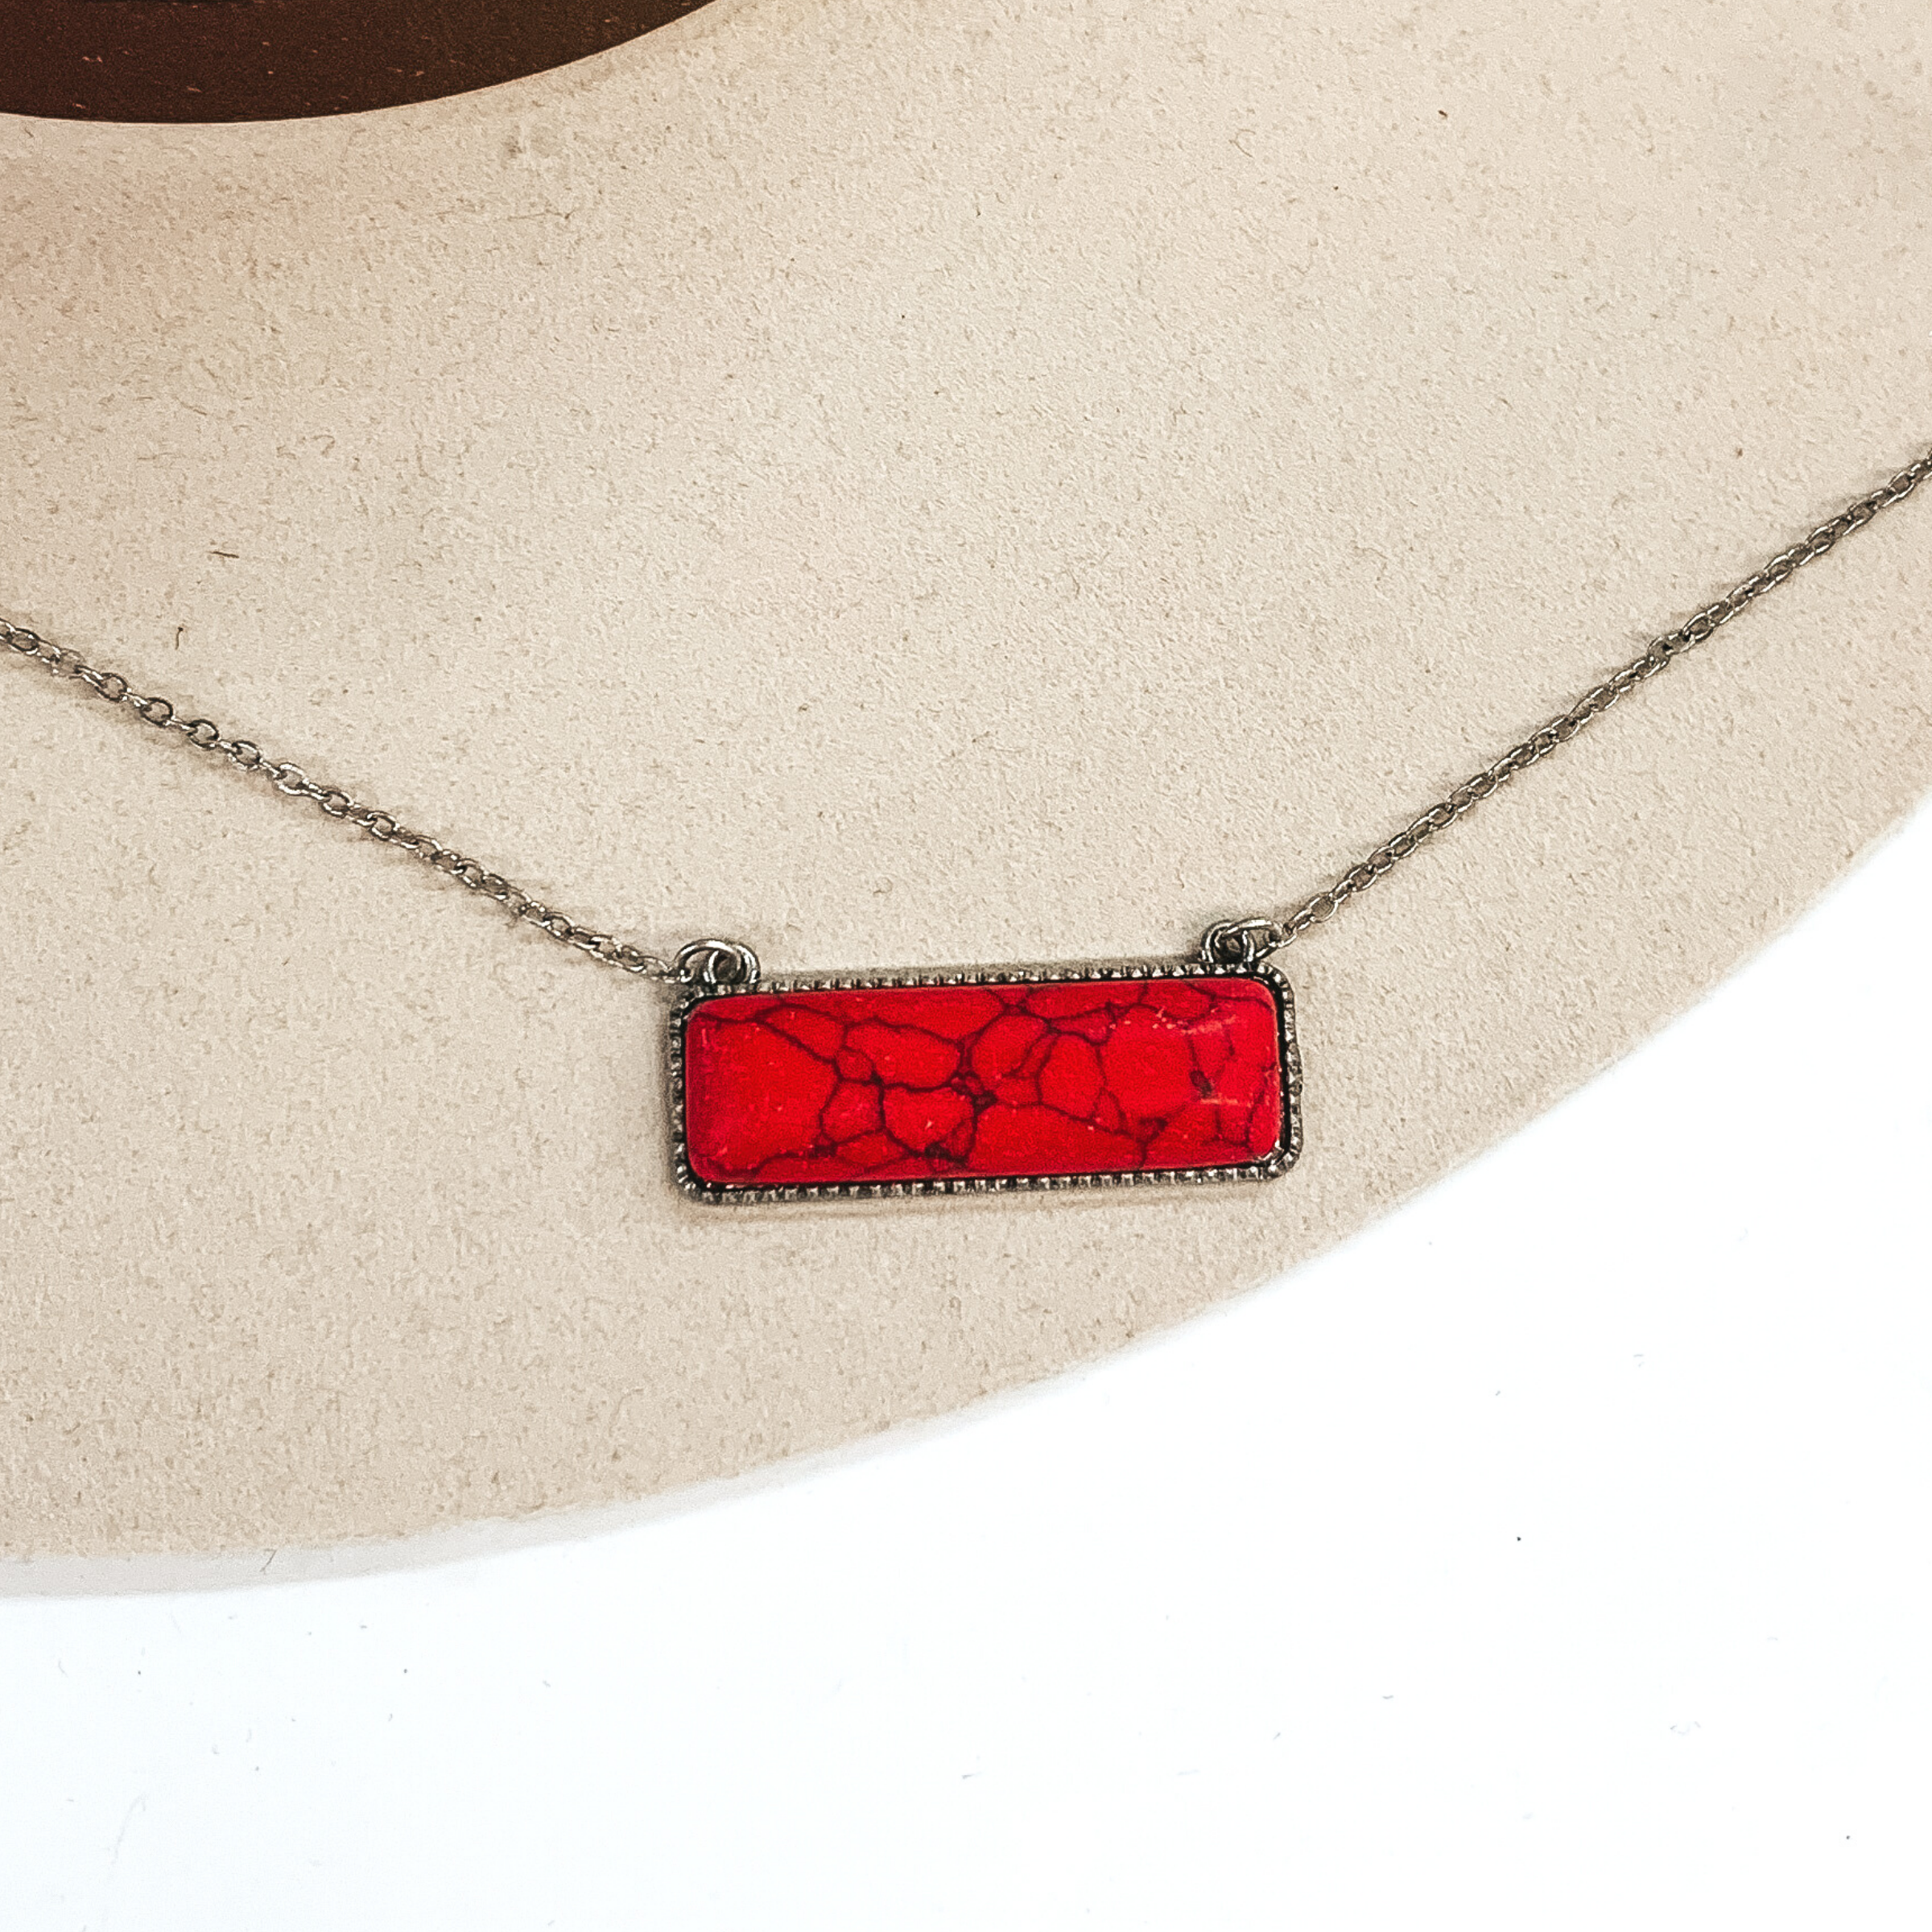 Silver chained necklace with a rectangle bar pendant. The pendant includes a red rectangle stone. This necklace is pictured on a white and ivory background.